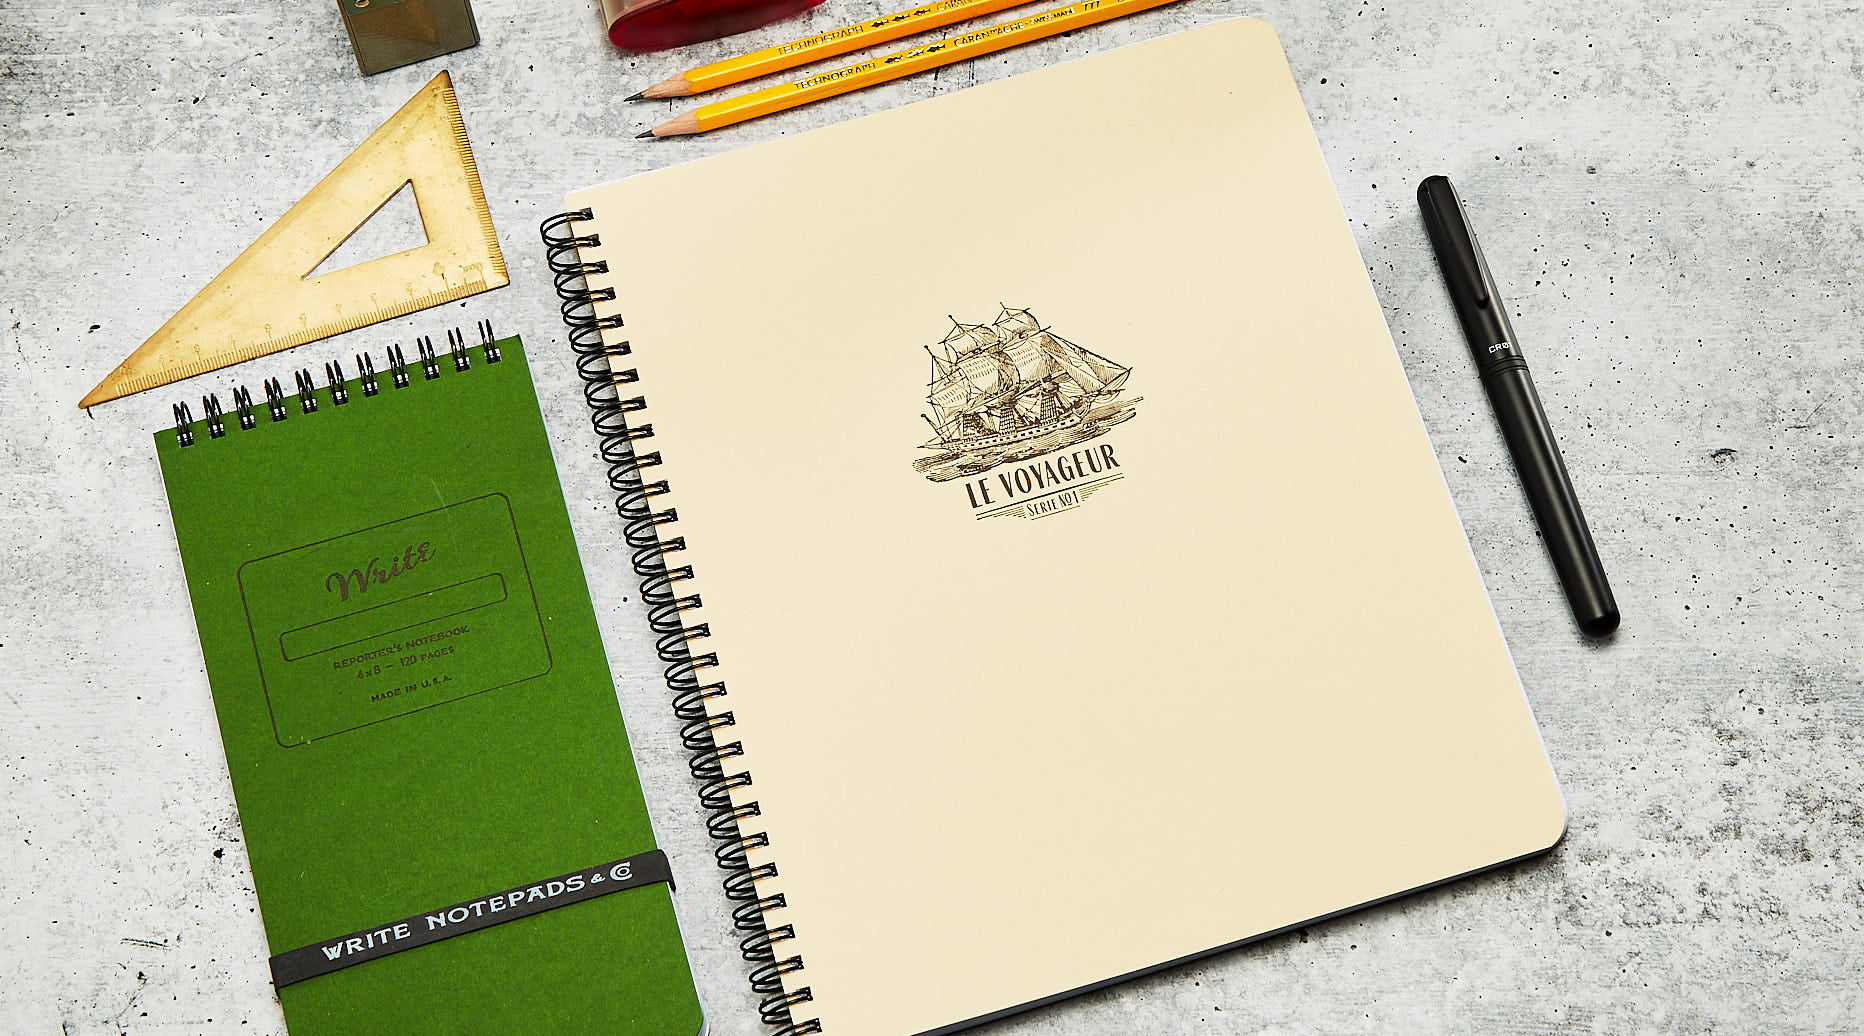 Le Voyageur limited edition notebook on table with a forest colored Reporter notebook next to it and a pen to the right